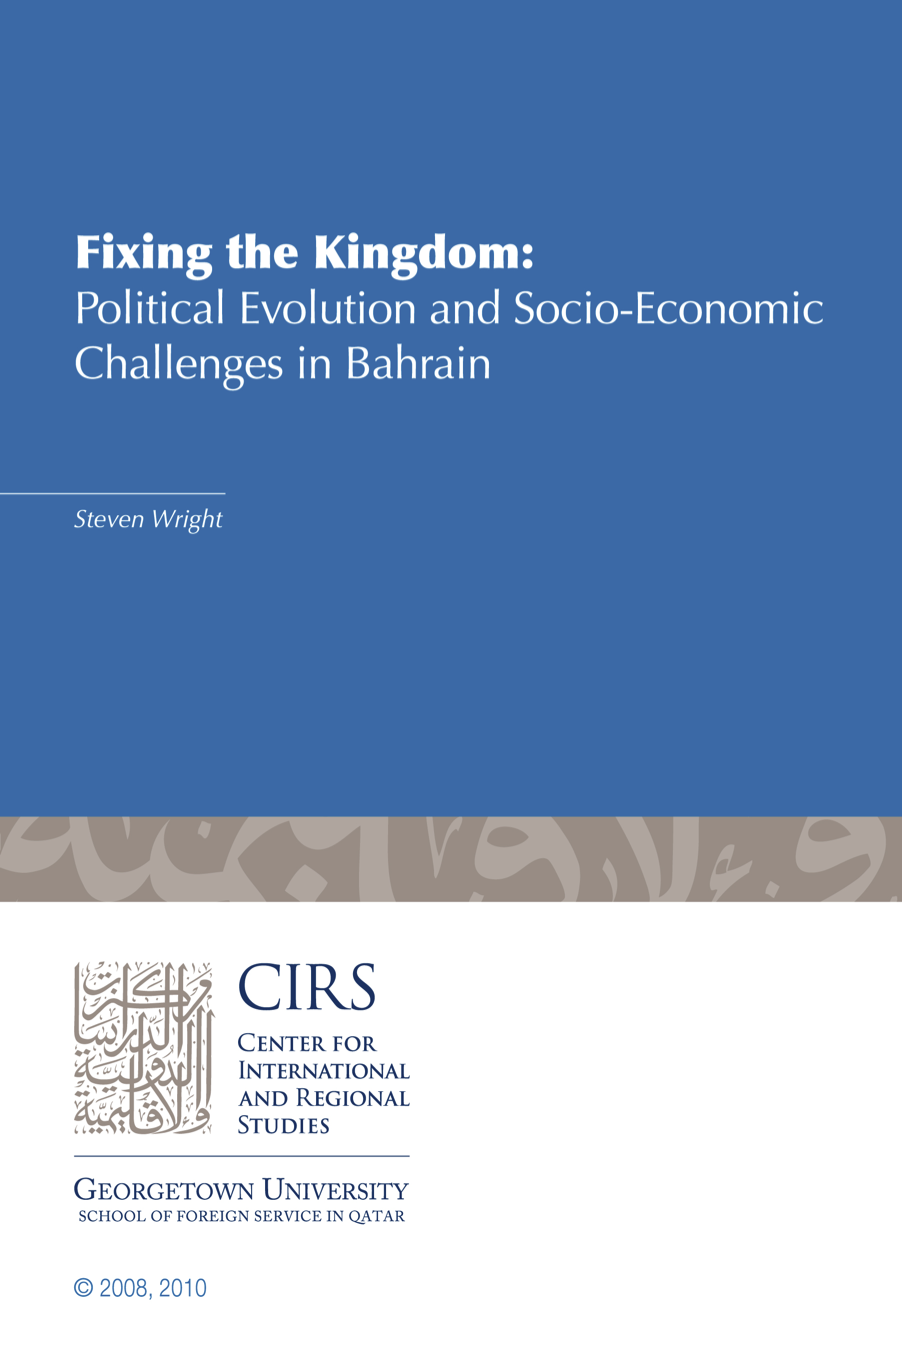 Fixing the Kingdom: Political Evolution and Socio-Economic Challenges in Bahrain